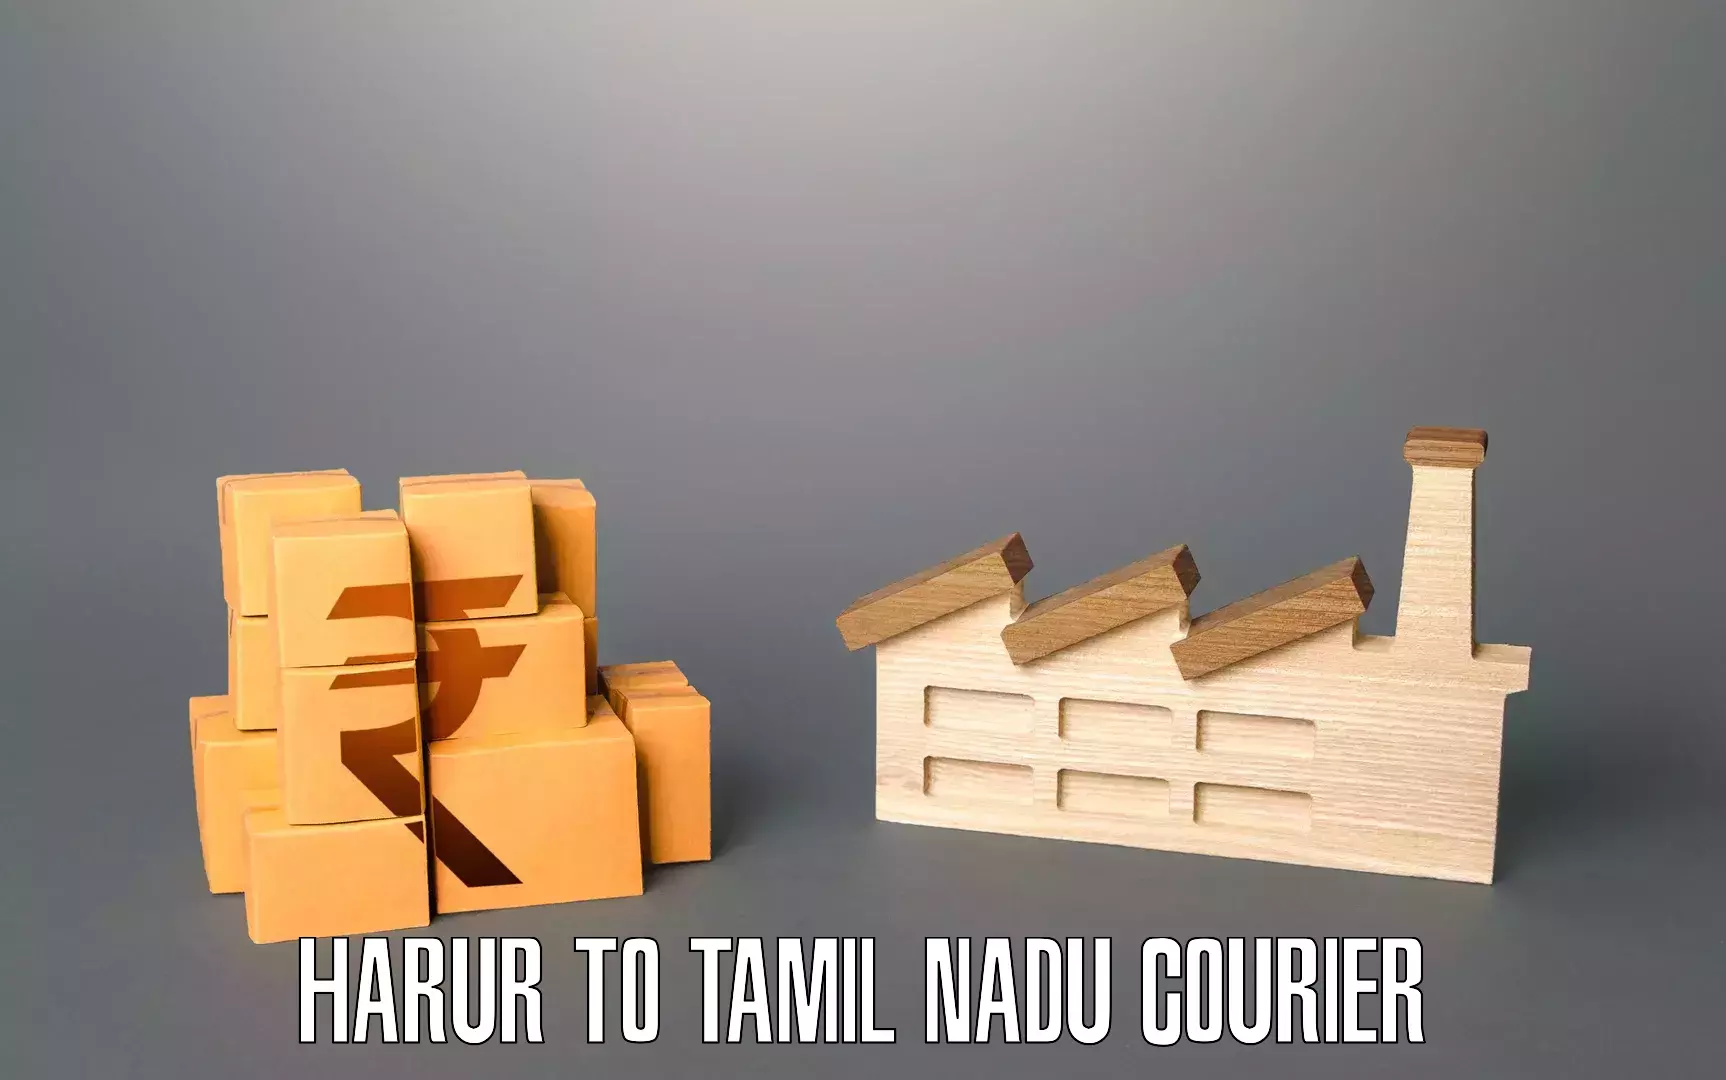 Hassle-free relocation Harur to Karur